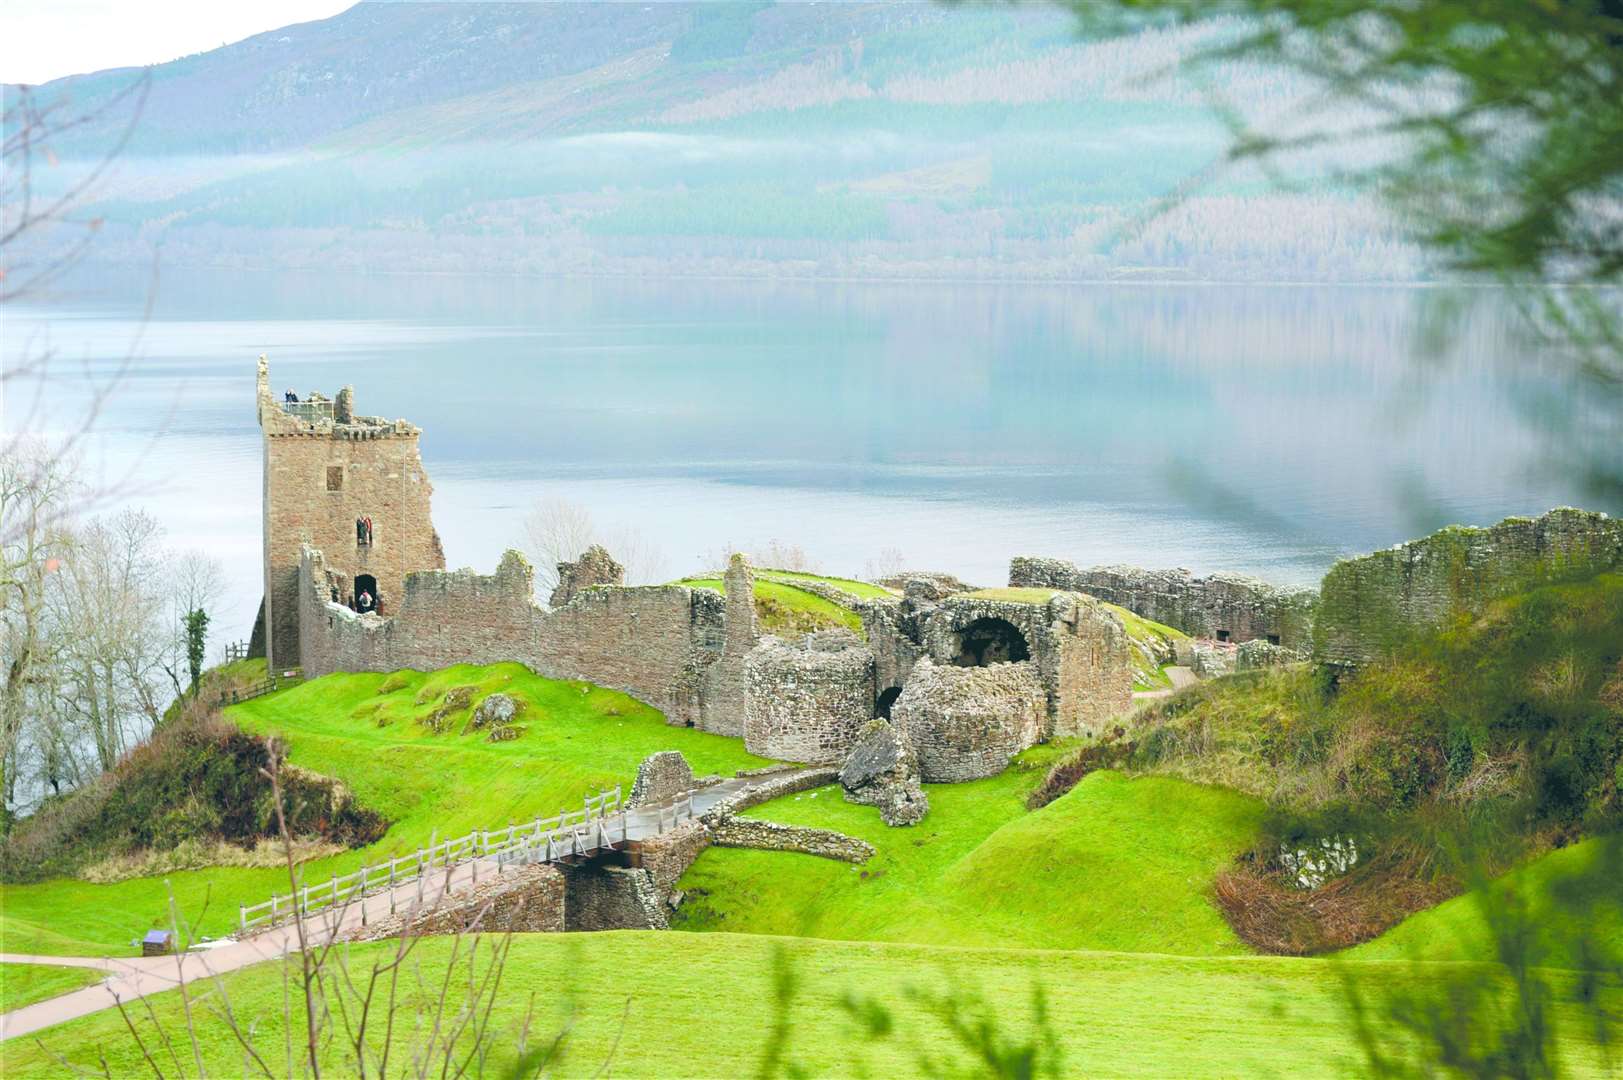 Urquhart Castle featured in a list among the 15 most instagrammable castles in the UK. Picture: Gary Anthony.